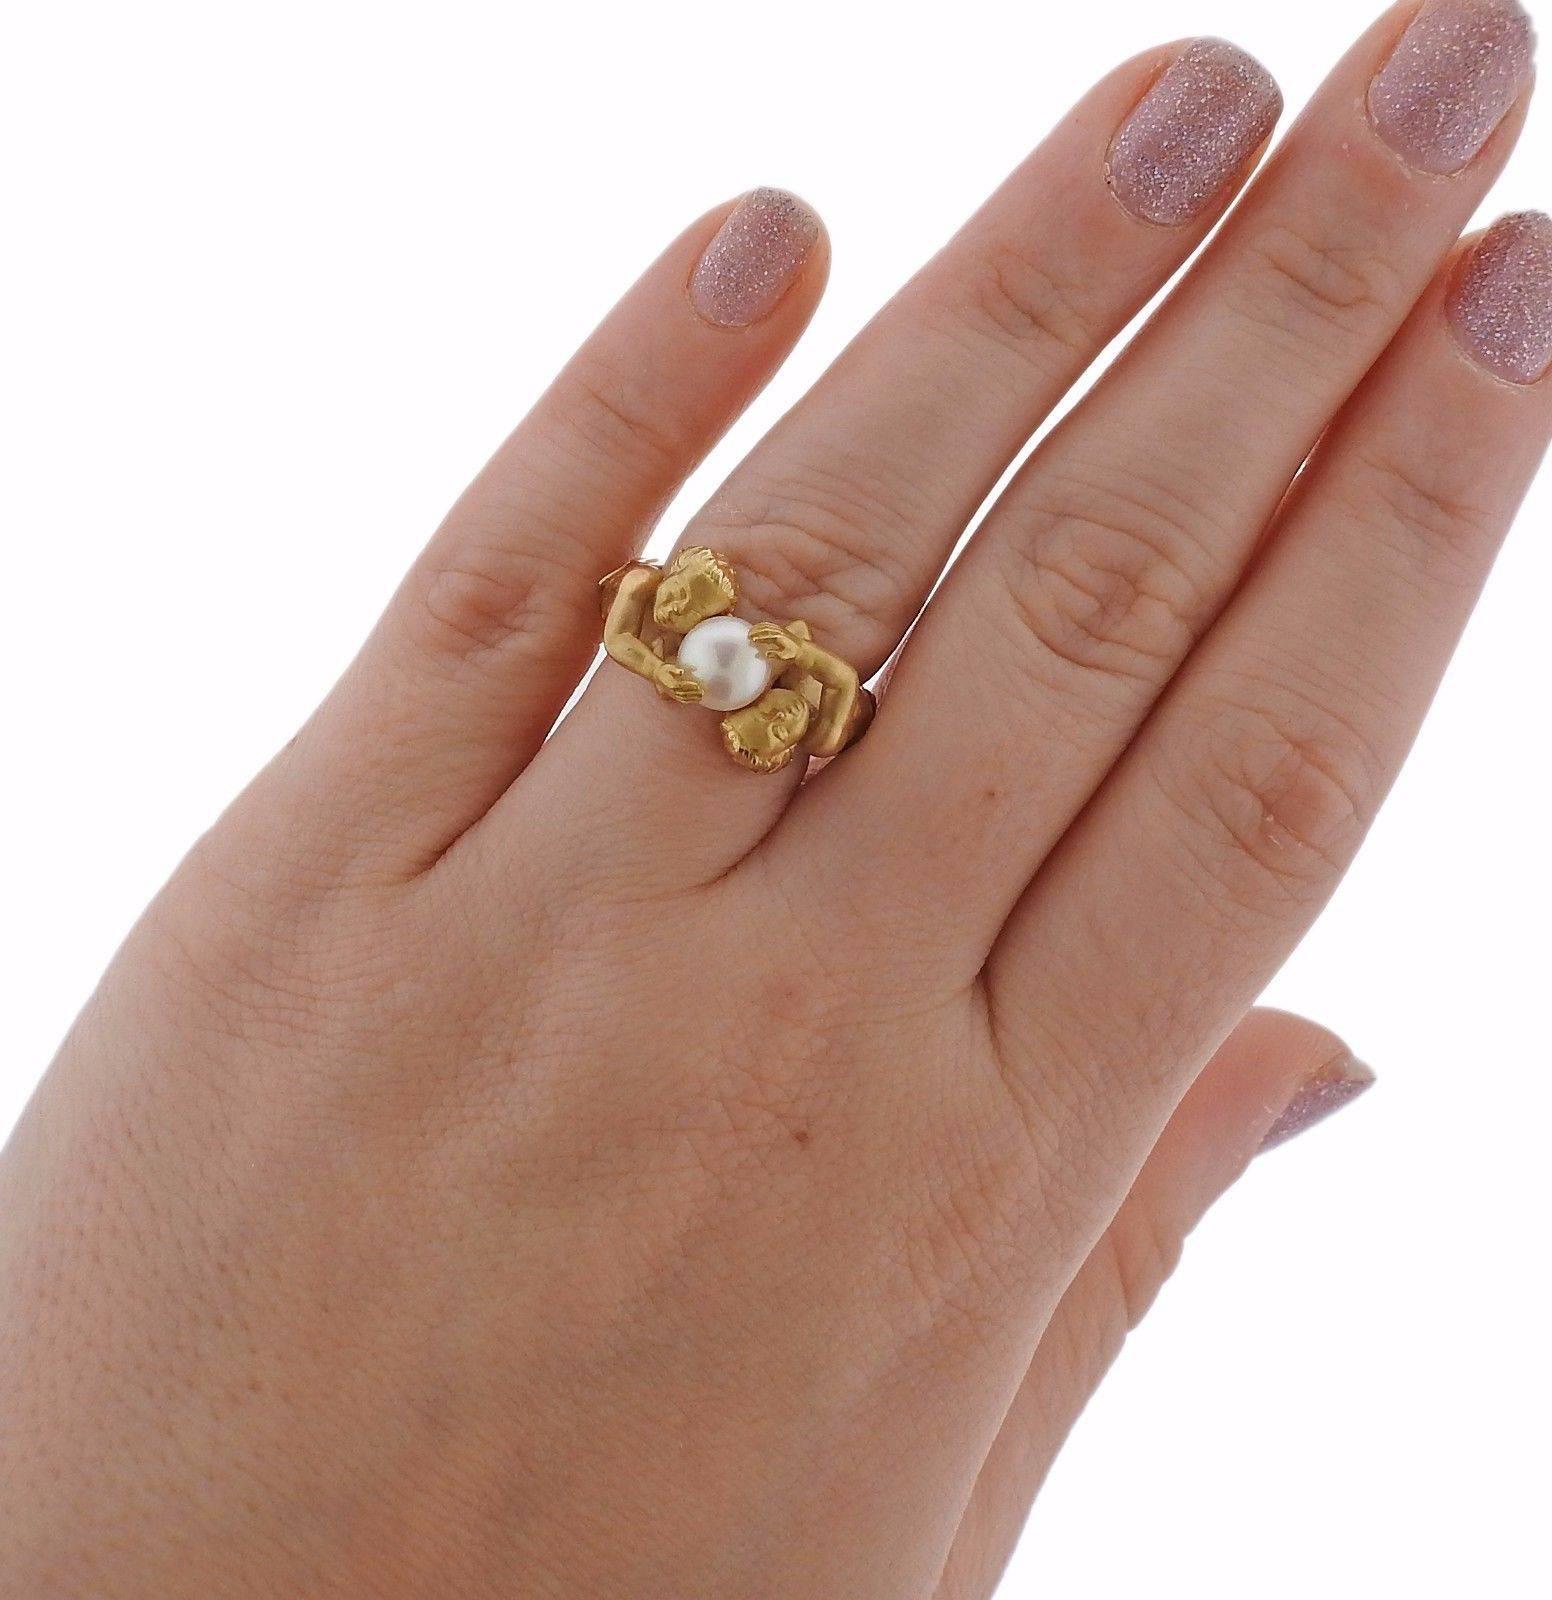 An 18k yellow gold ring set with a 7mm pearl.  The ring is a size 7 and the ring top is 11mm x 20mm. The weight of the ring is 14 grams.  Marked: Carrera mark, 750, 101416.